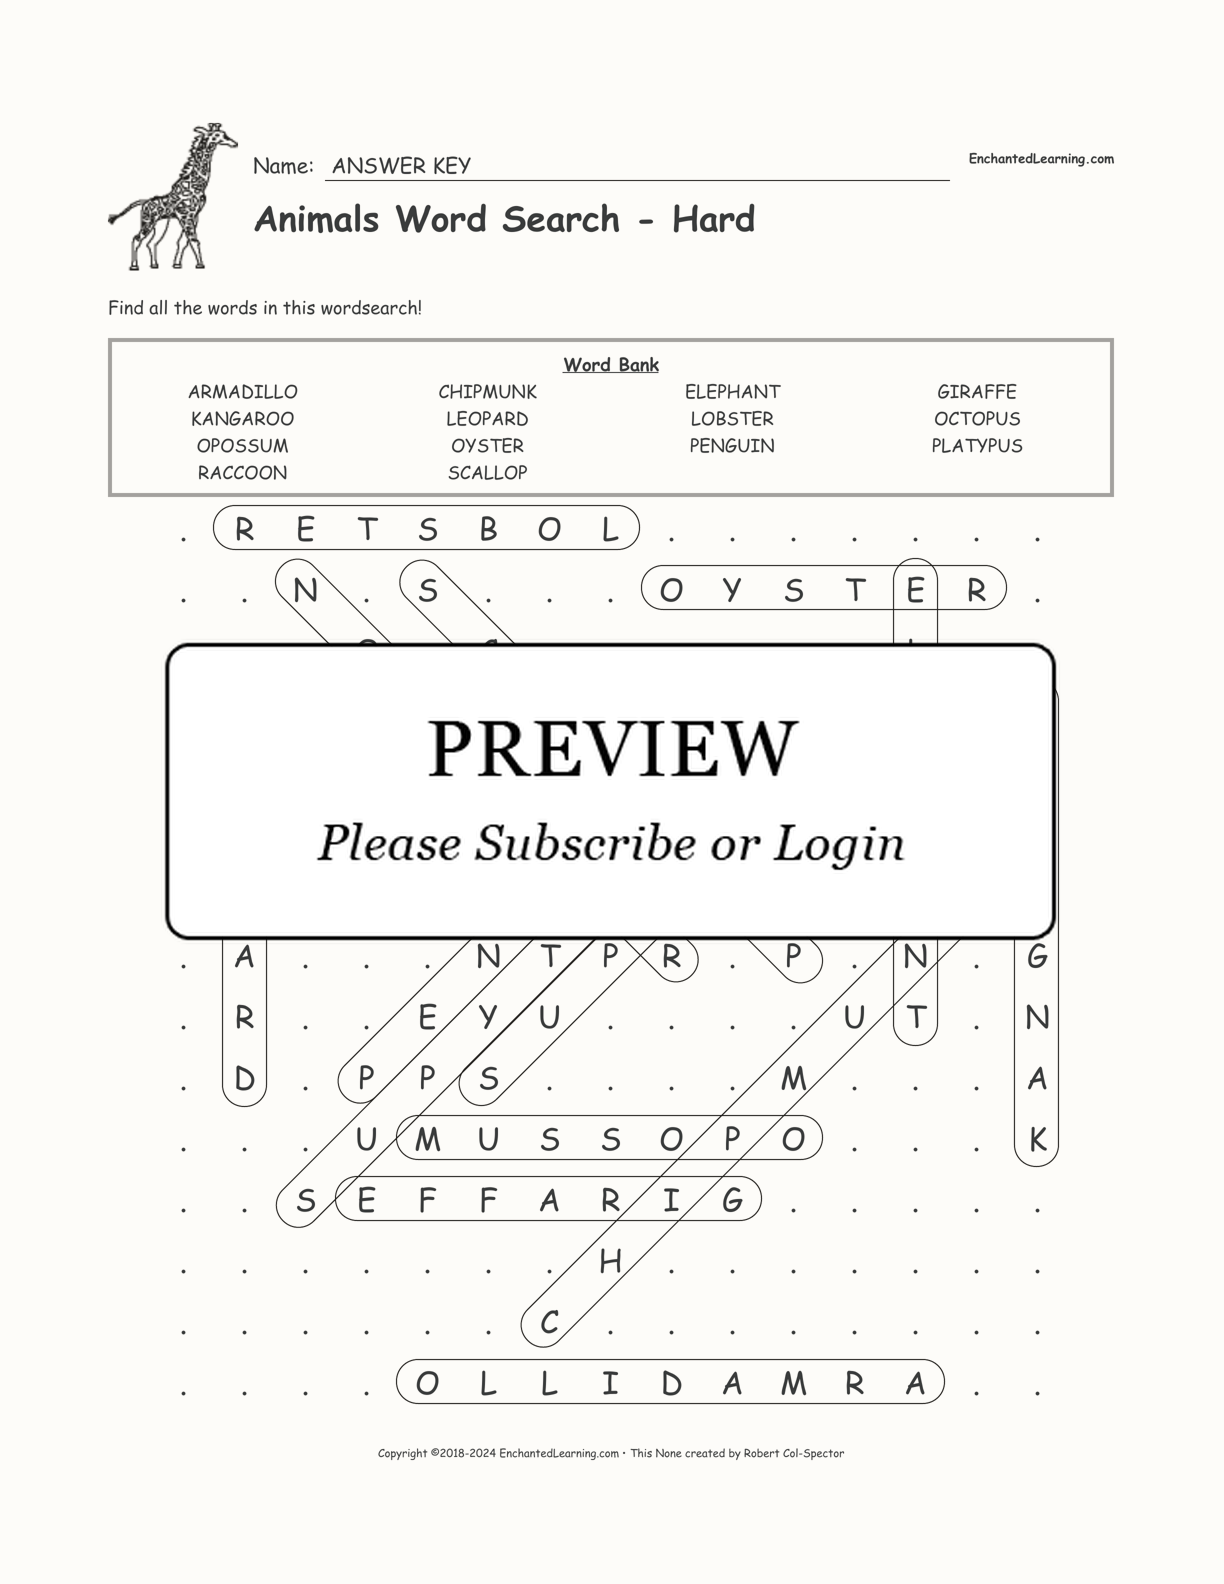 Animals Word Search - Hard interactive worksheet page 2